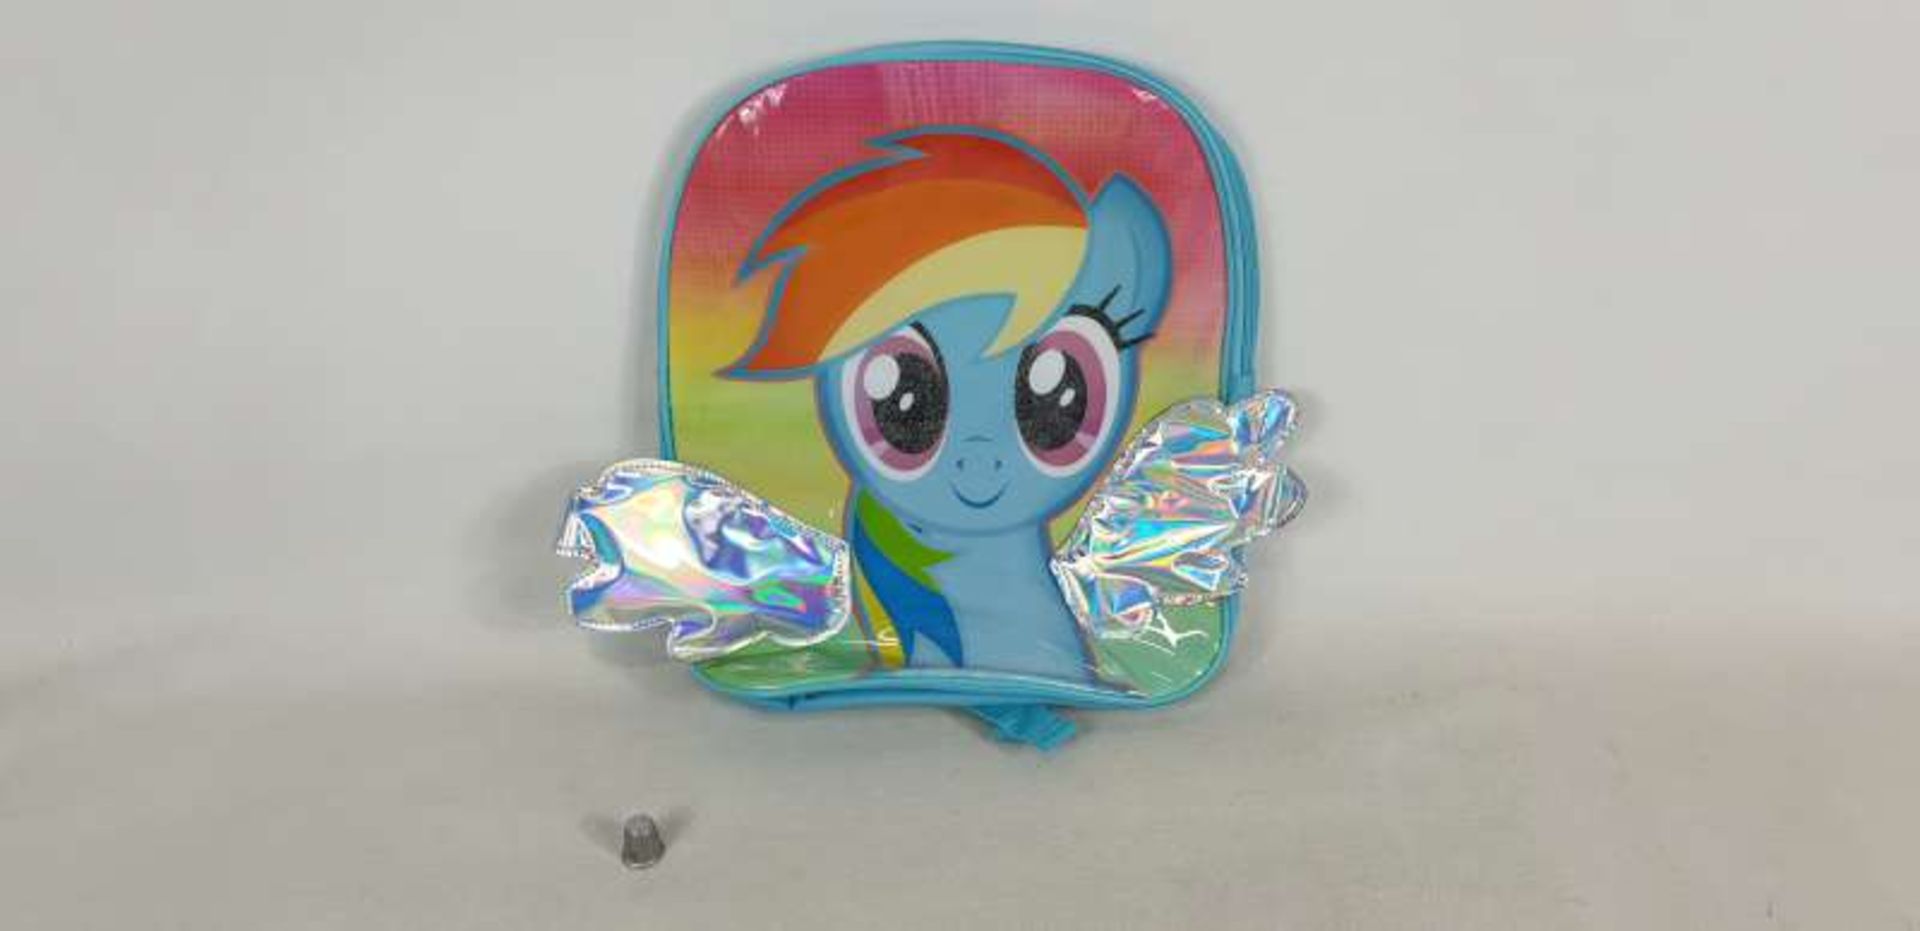 40 X MY LITTLE PONY DOUBLE WING BACKPACKS IN 2 BOXES